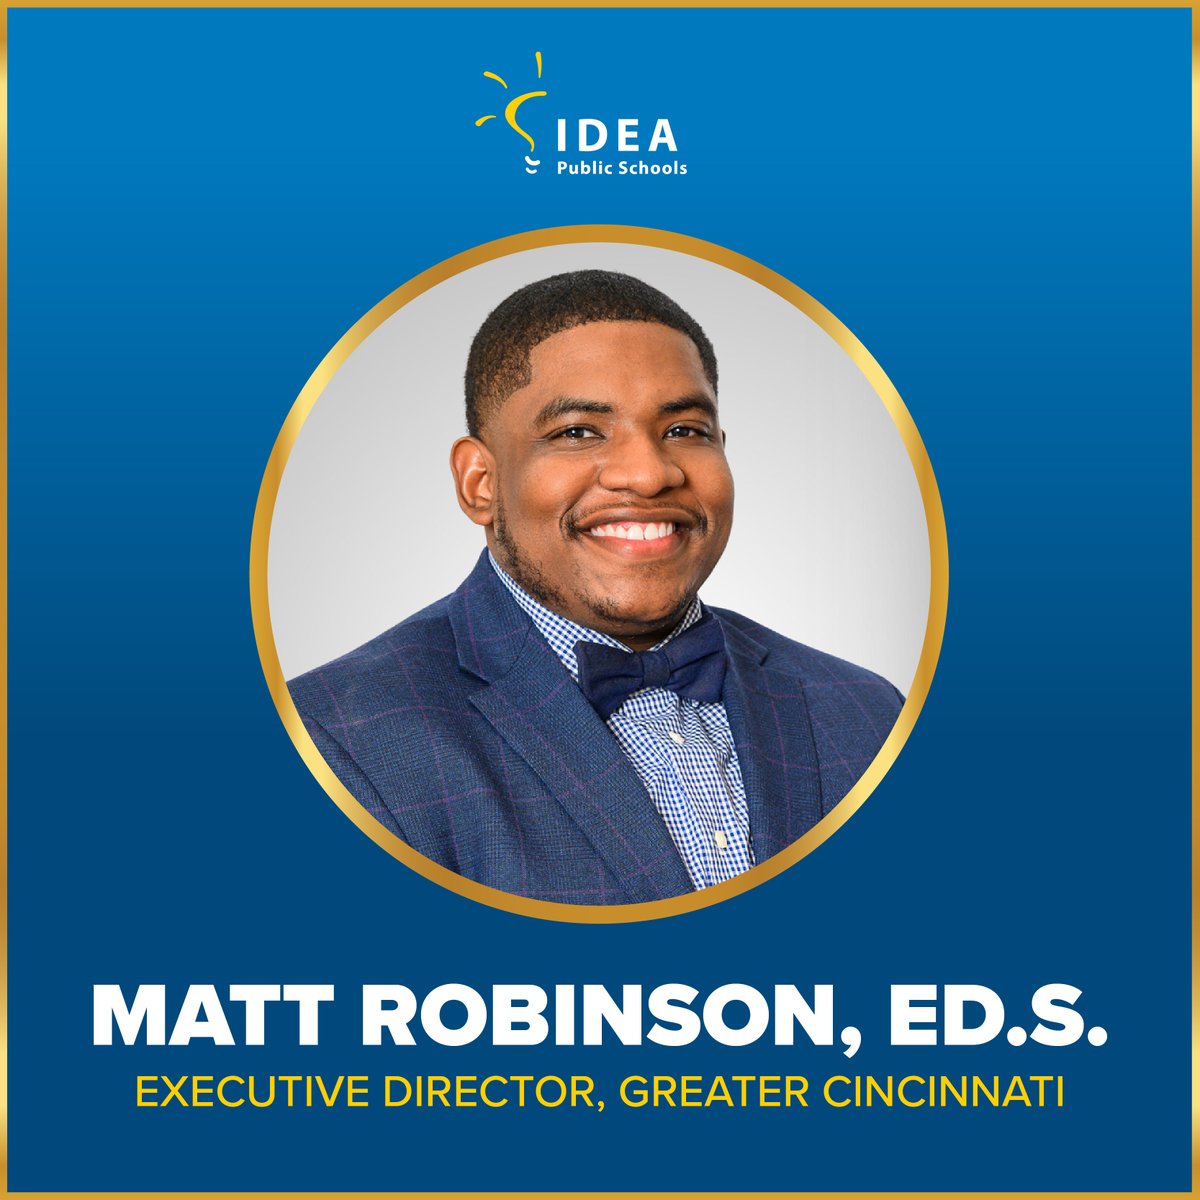 Join us in celebrating Matt Robinson, Ed.S., as our Executive Director of IDEA Greater Cincinnati! 🎉 For Mr. Robinson, every minute and every life has a purpose, and he looks forward to ensuring that our students, staff, and families experience joy, growth, and freedom. 🌟